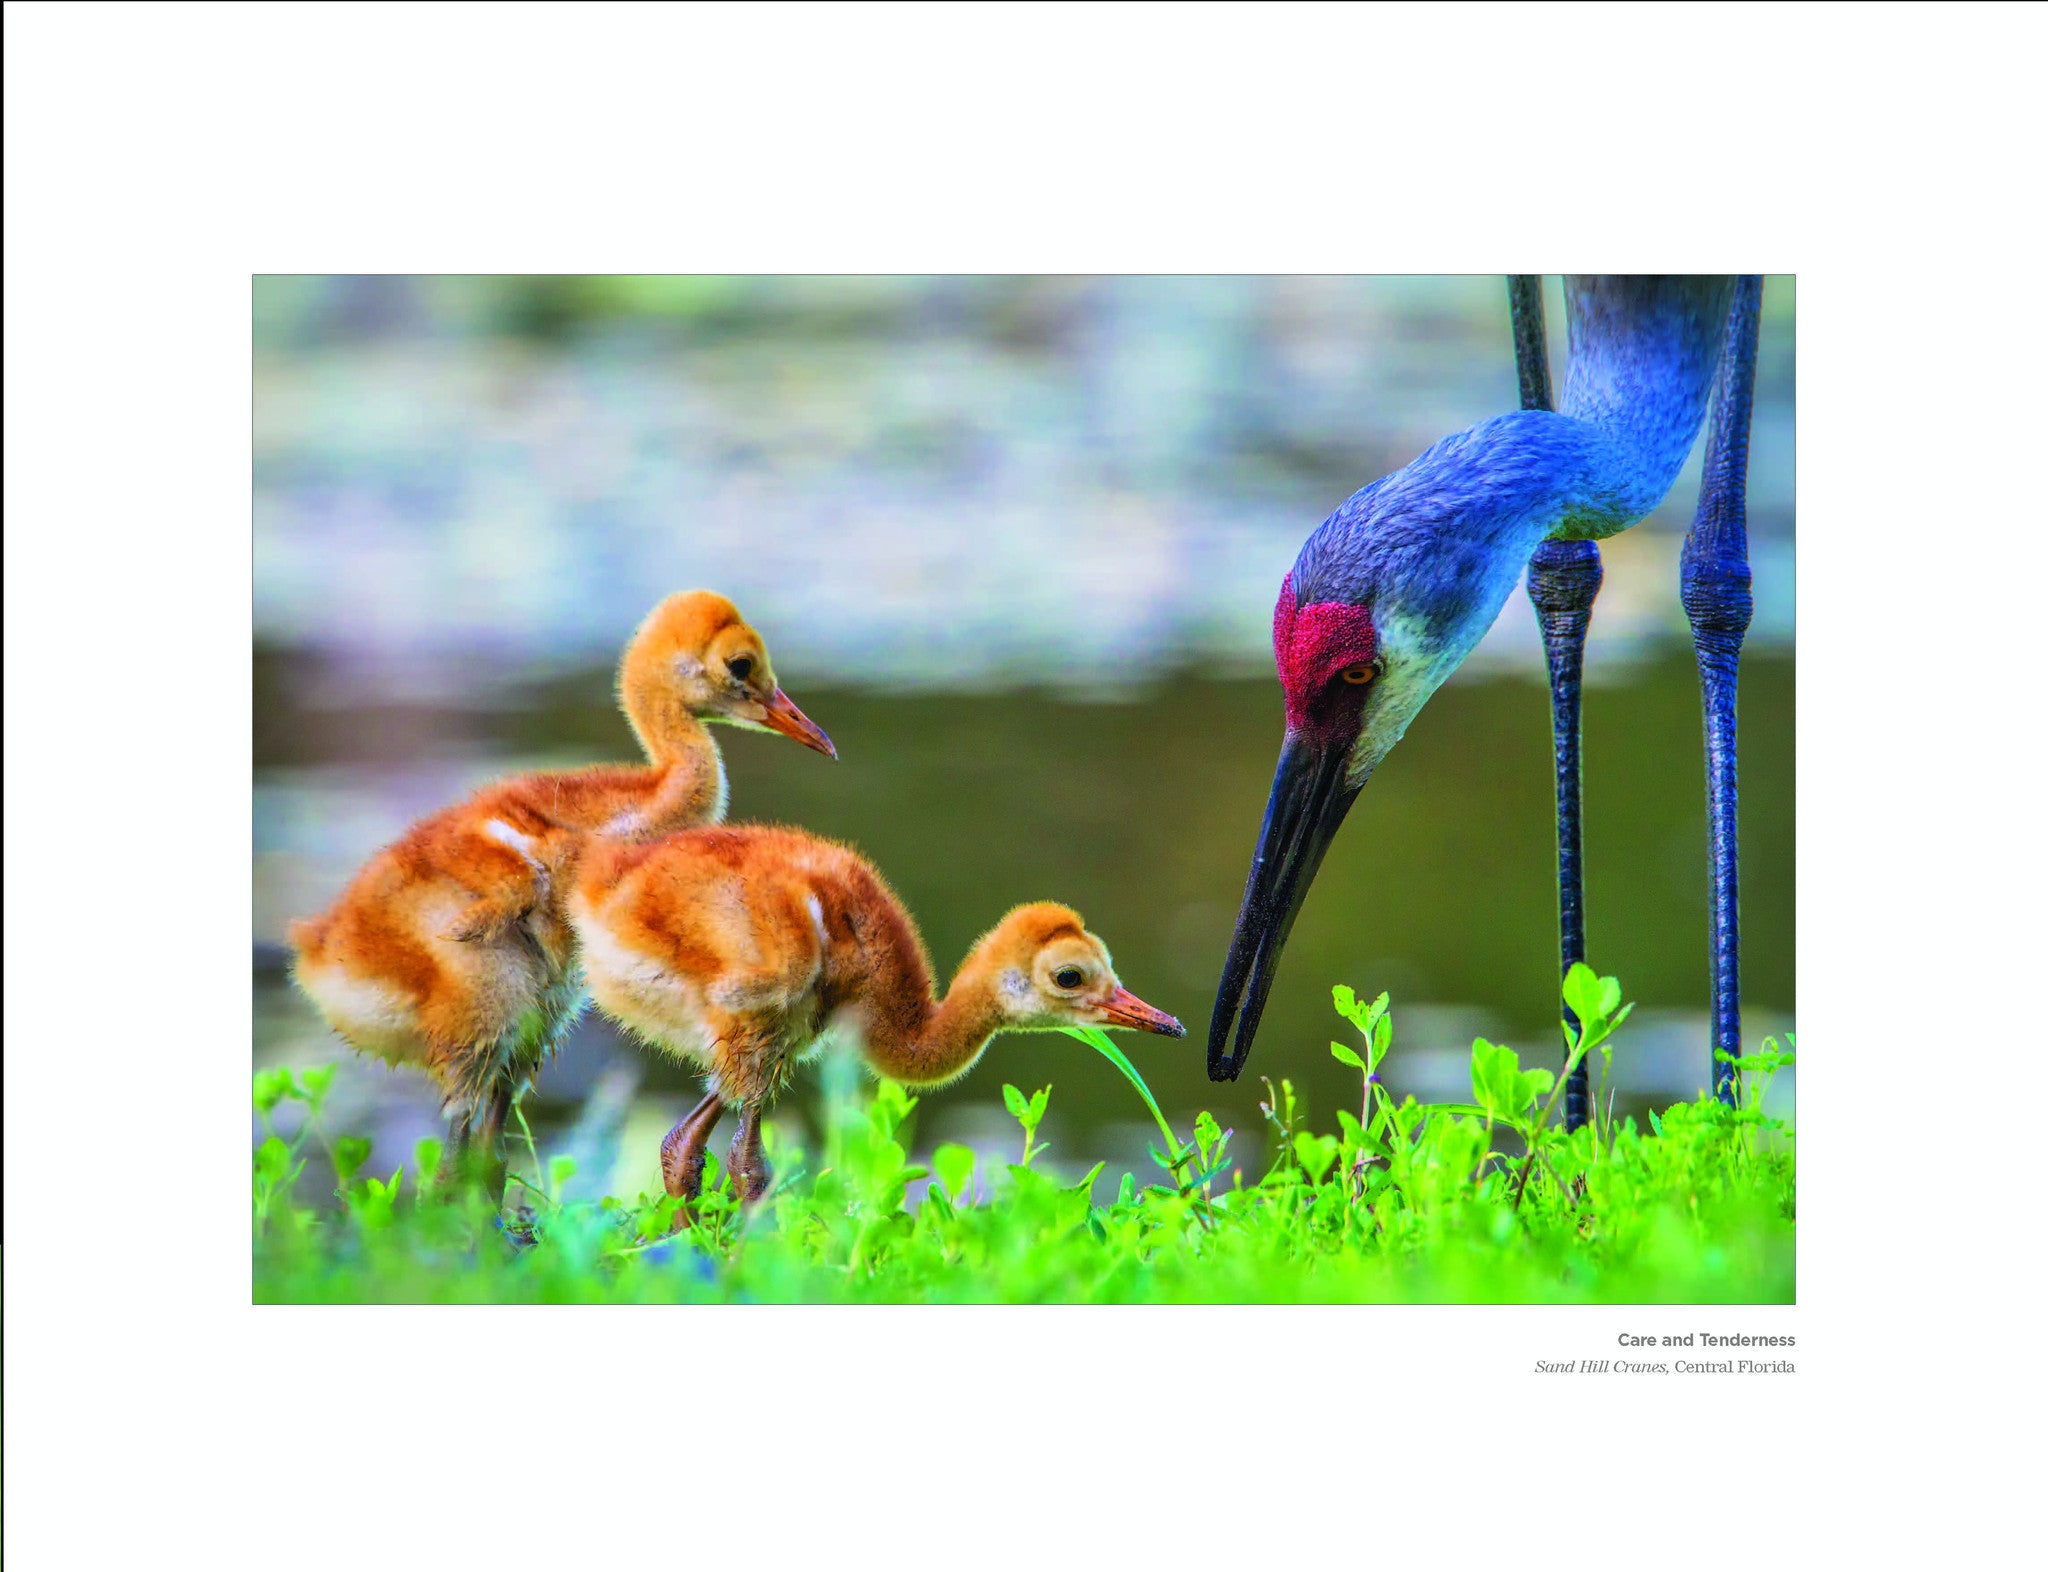 Care and Tenderness: Sand Hill Cranes Birds, Central Florida Beholding Nature Eric Horan photography book Starbooks